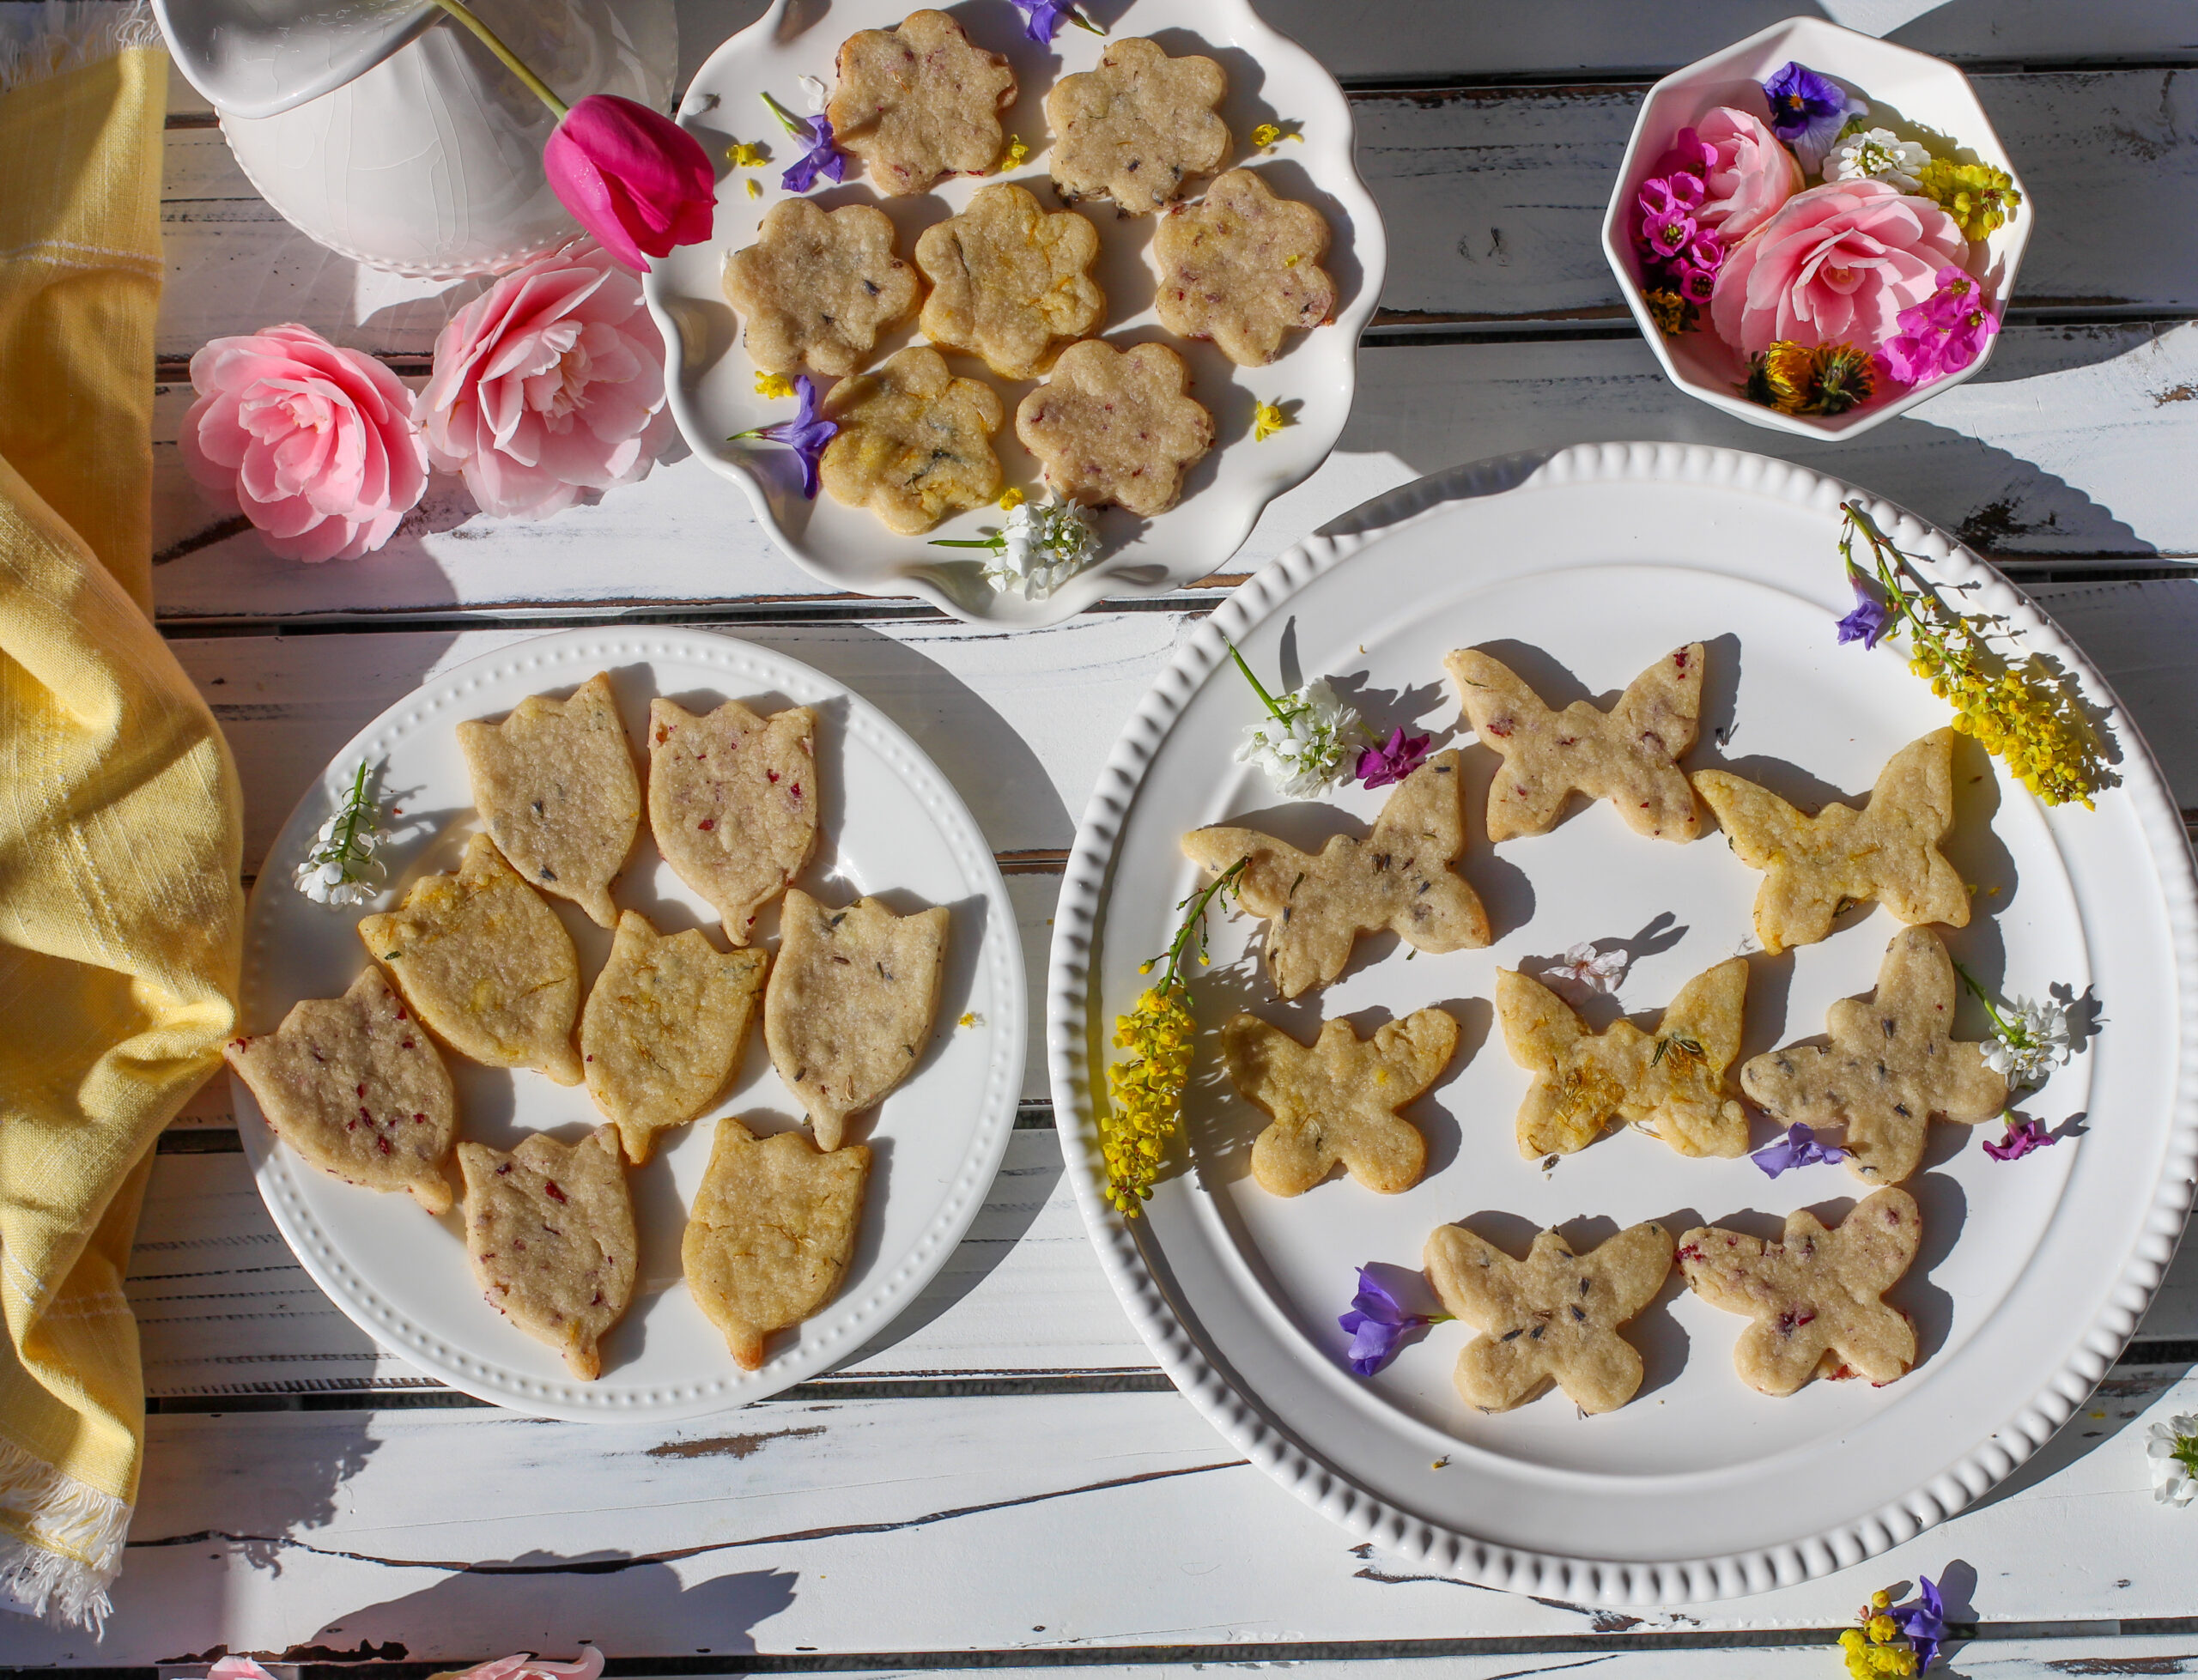 Edible flower shortbread - She Can't Eat What